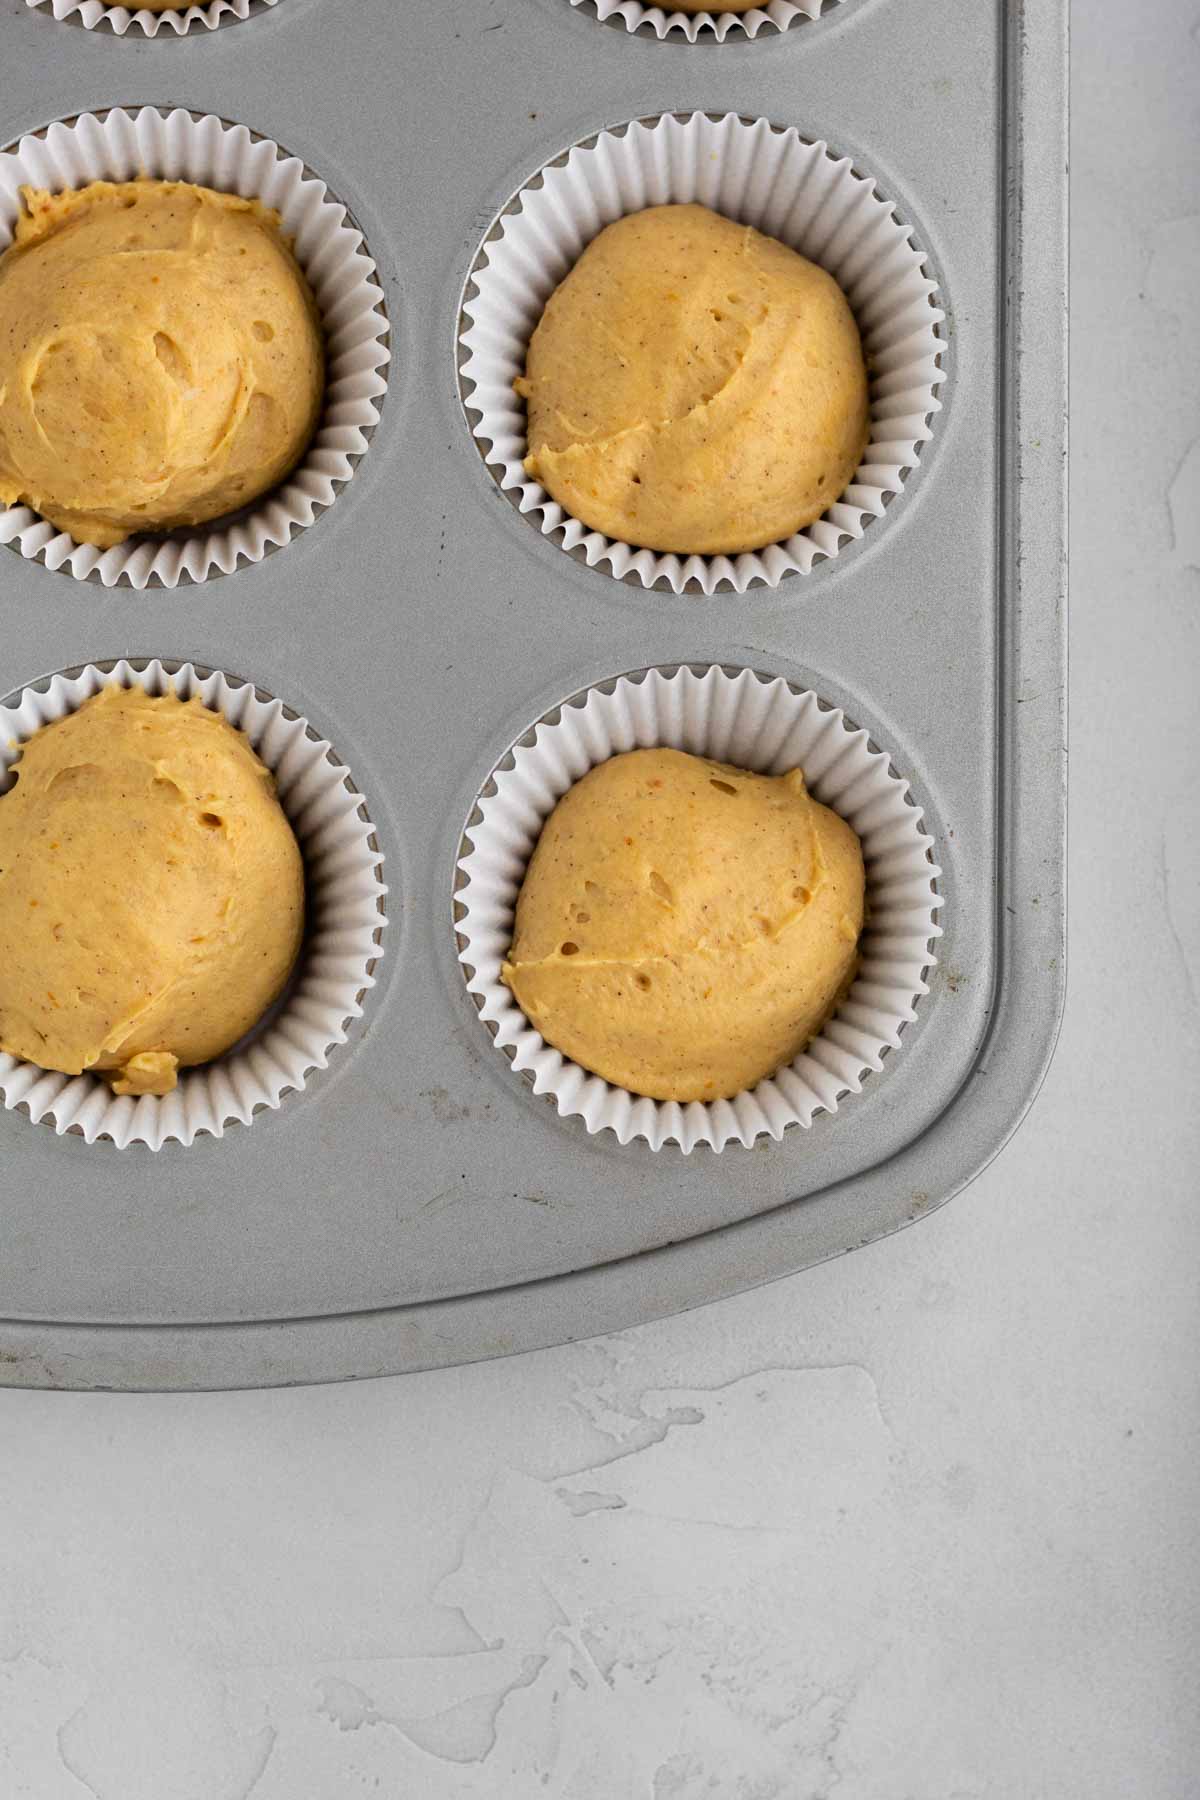 Filling cupcake tins with the batter.